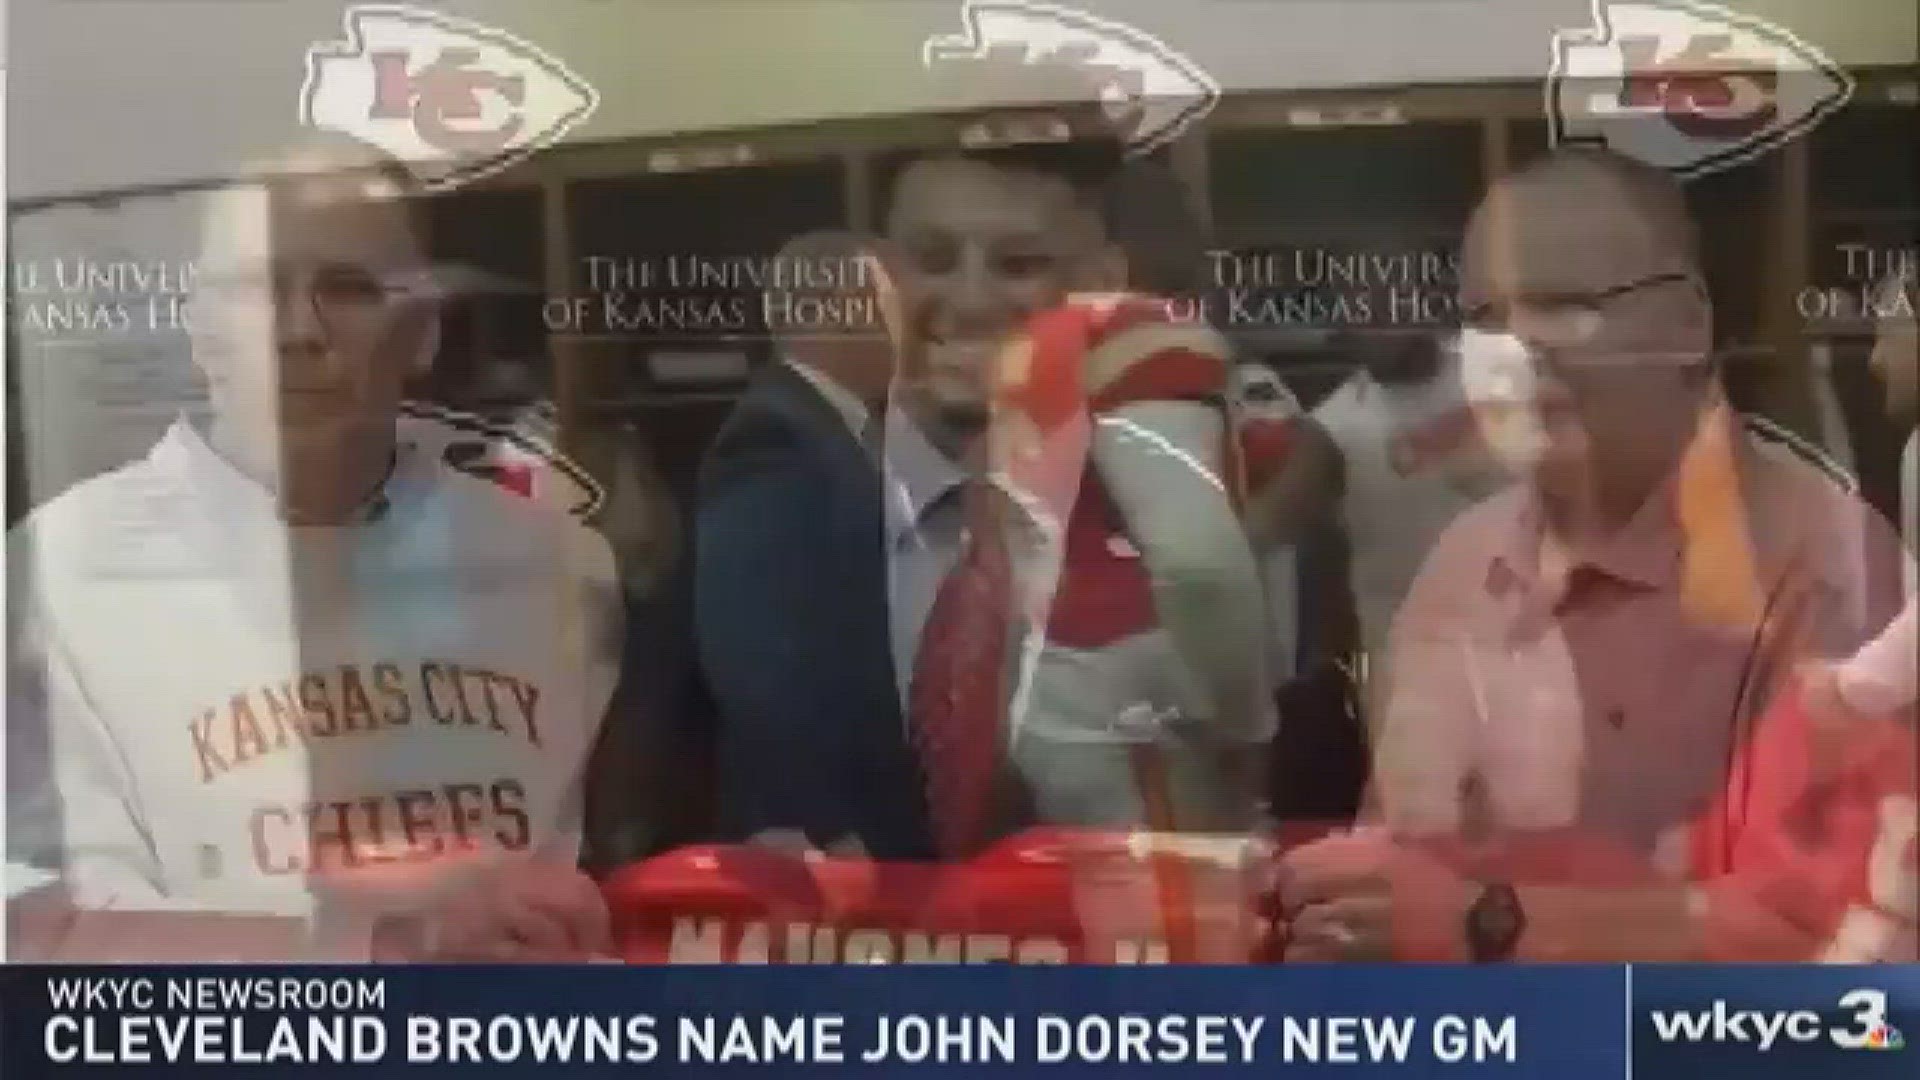 BREAKING NEWS: Cleveland Browns hire John Dorsey as General Manager